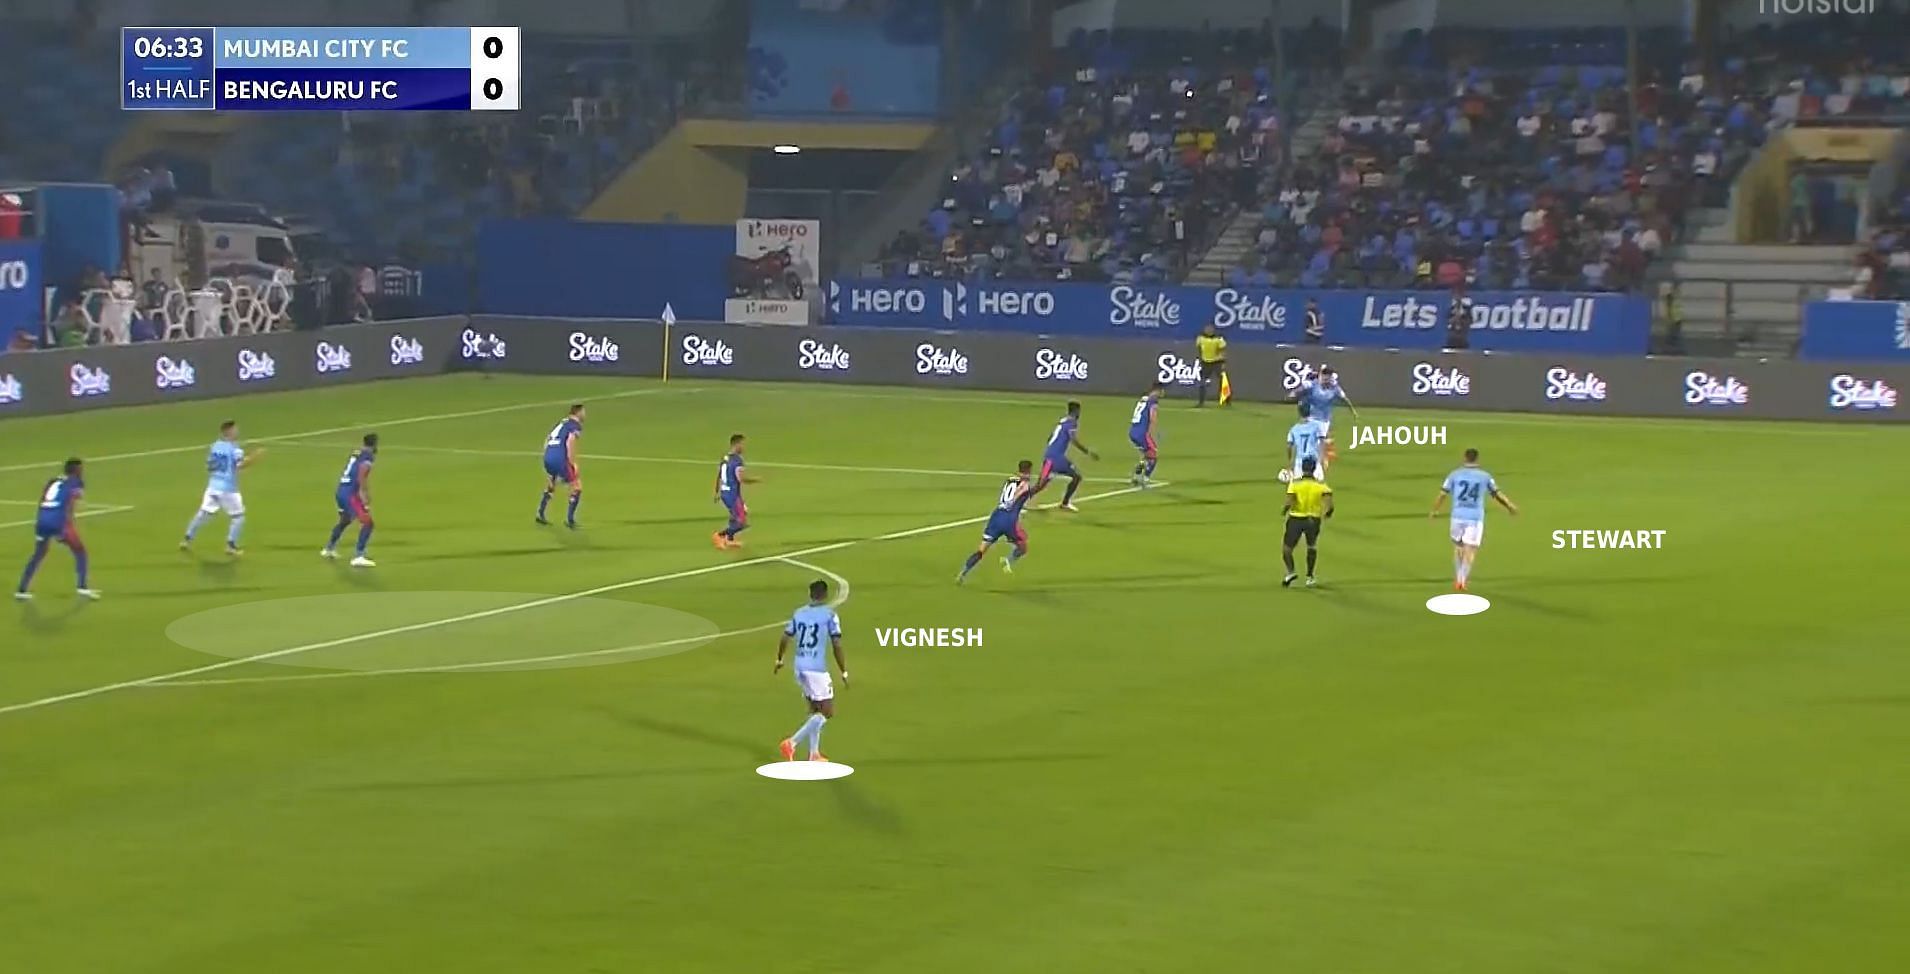 Bengaluru FC&#039;s midfielders are dragged wider by Ahmed Jahouh, which in turn creates space for Vignesh in midfield (Image Credits: Hotstar)